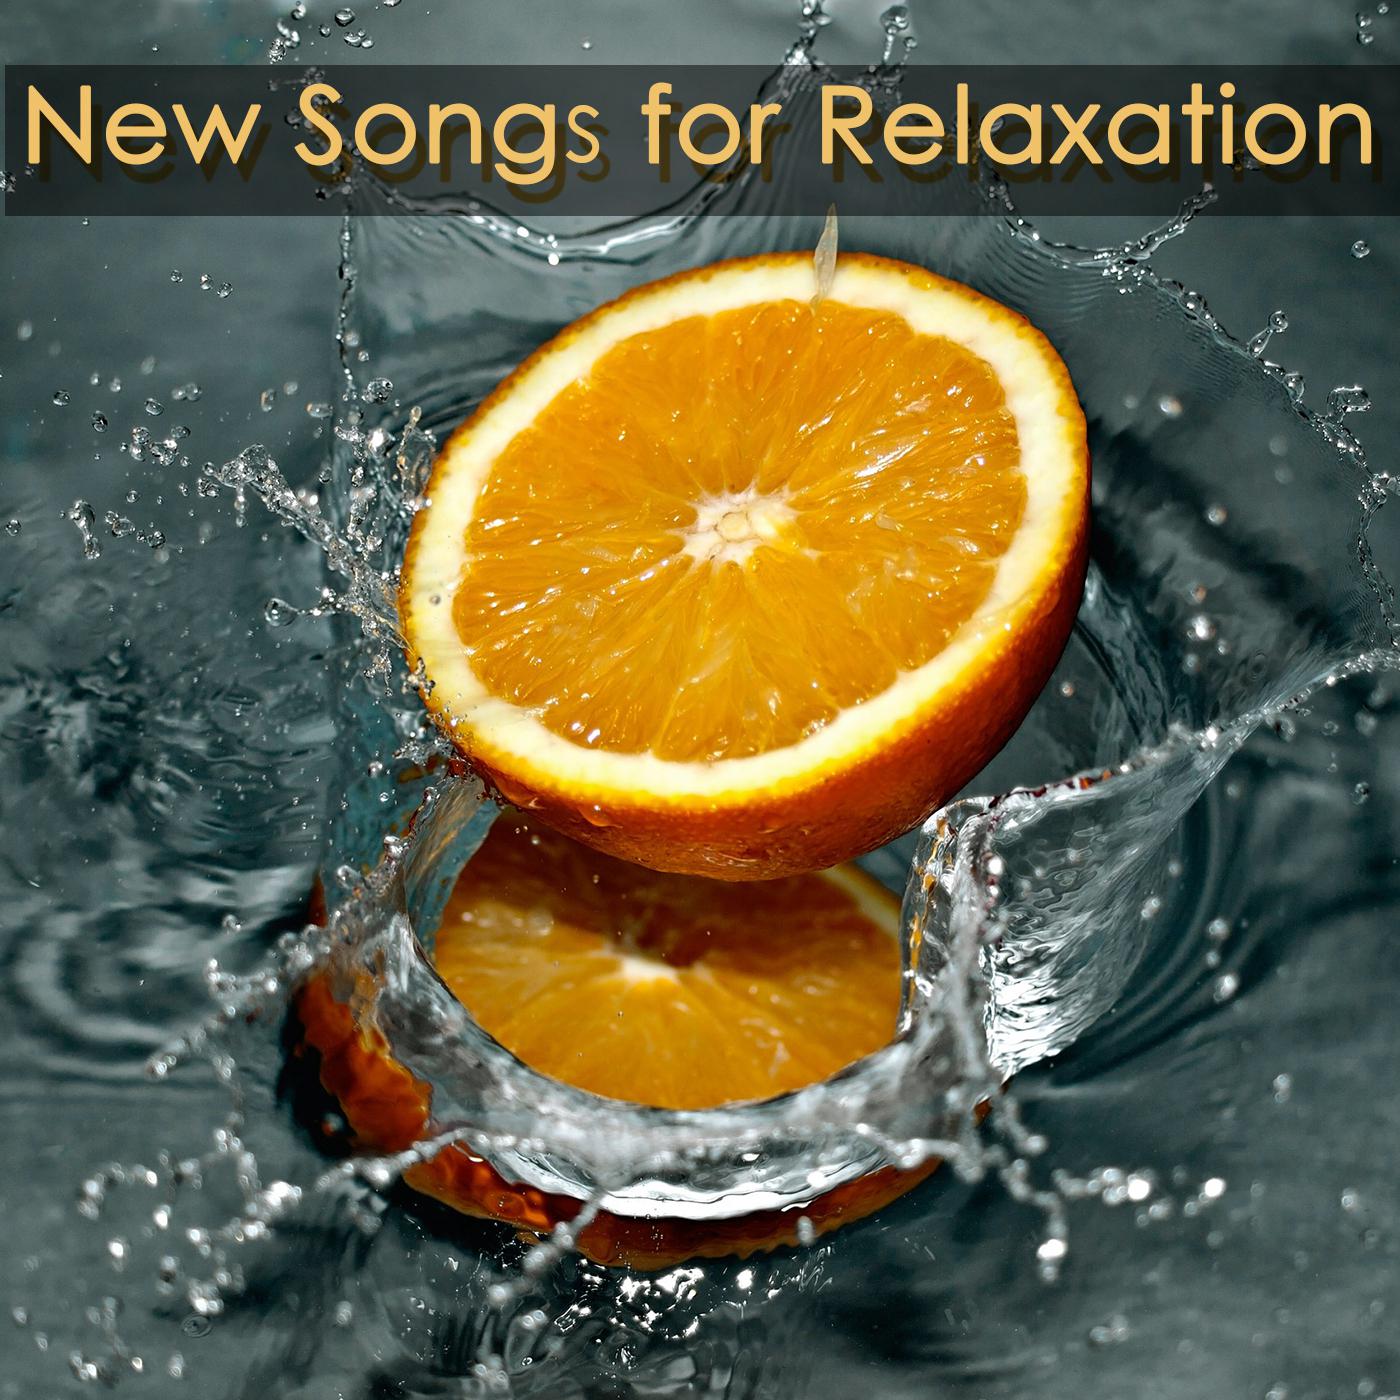 New Songs for Relaxation – Emotional Healing Music for Relaxation Meditation & Sleeping